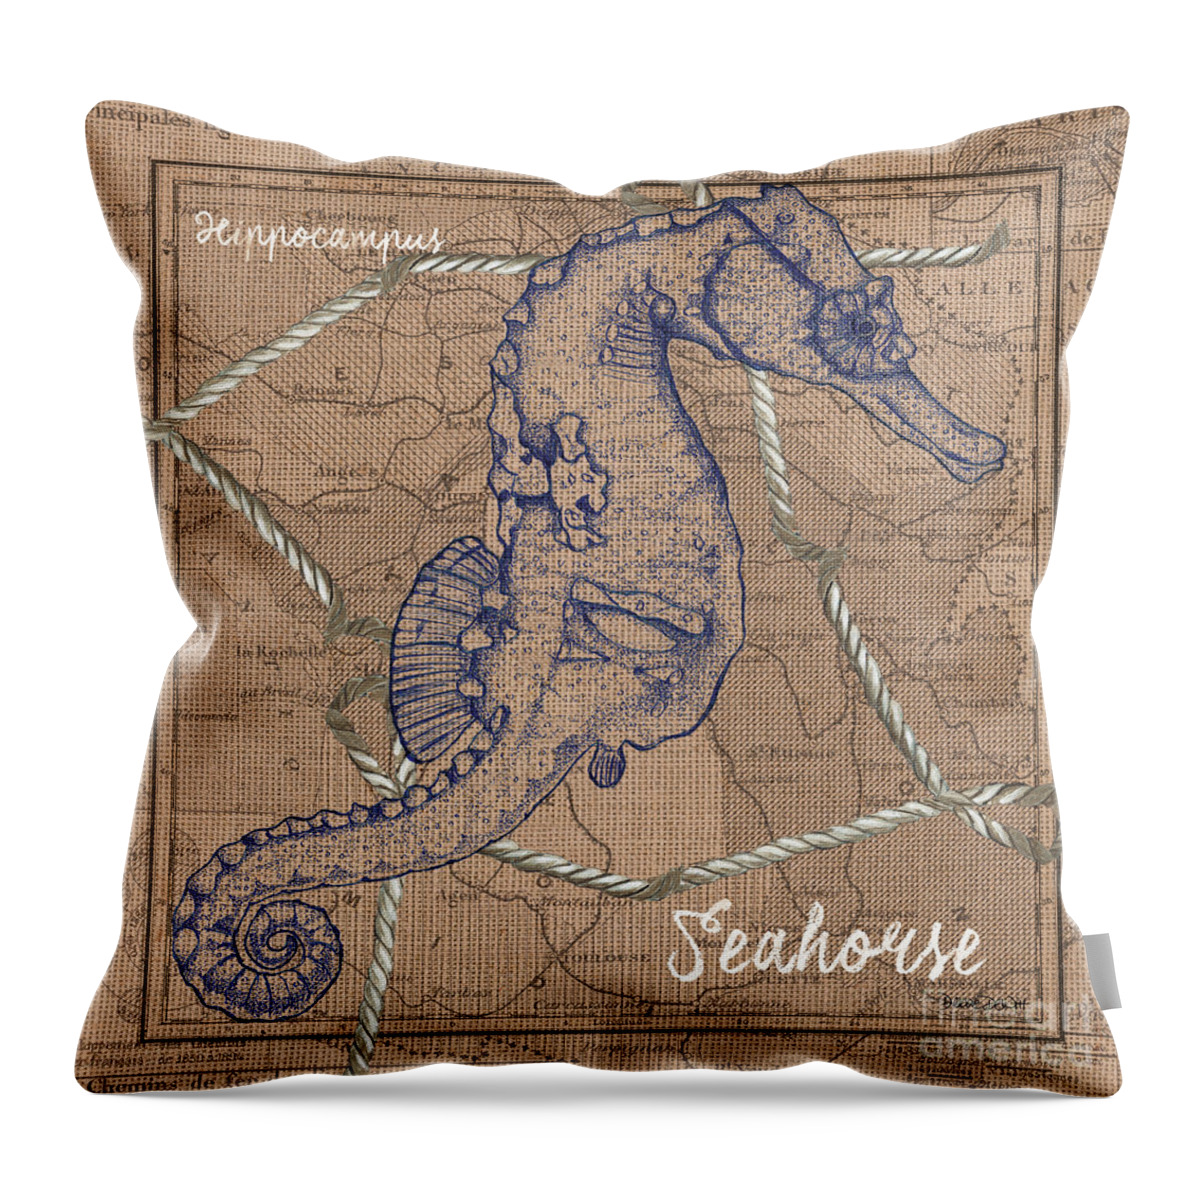 Seahorse Throw Pillow featuring the painting Burlap Seahorse by Debbie DeWitt